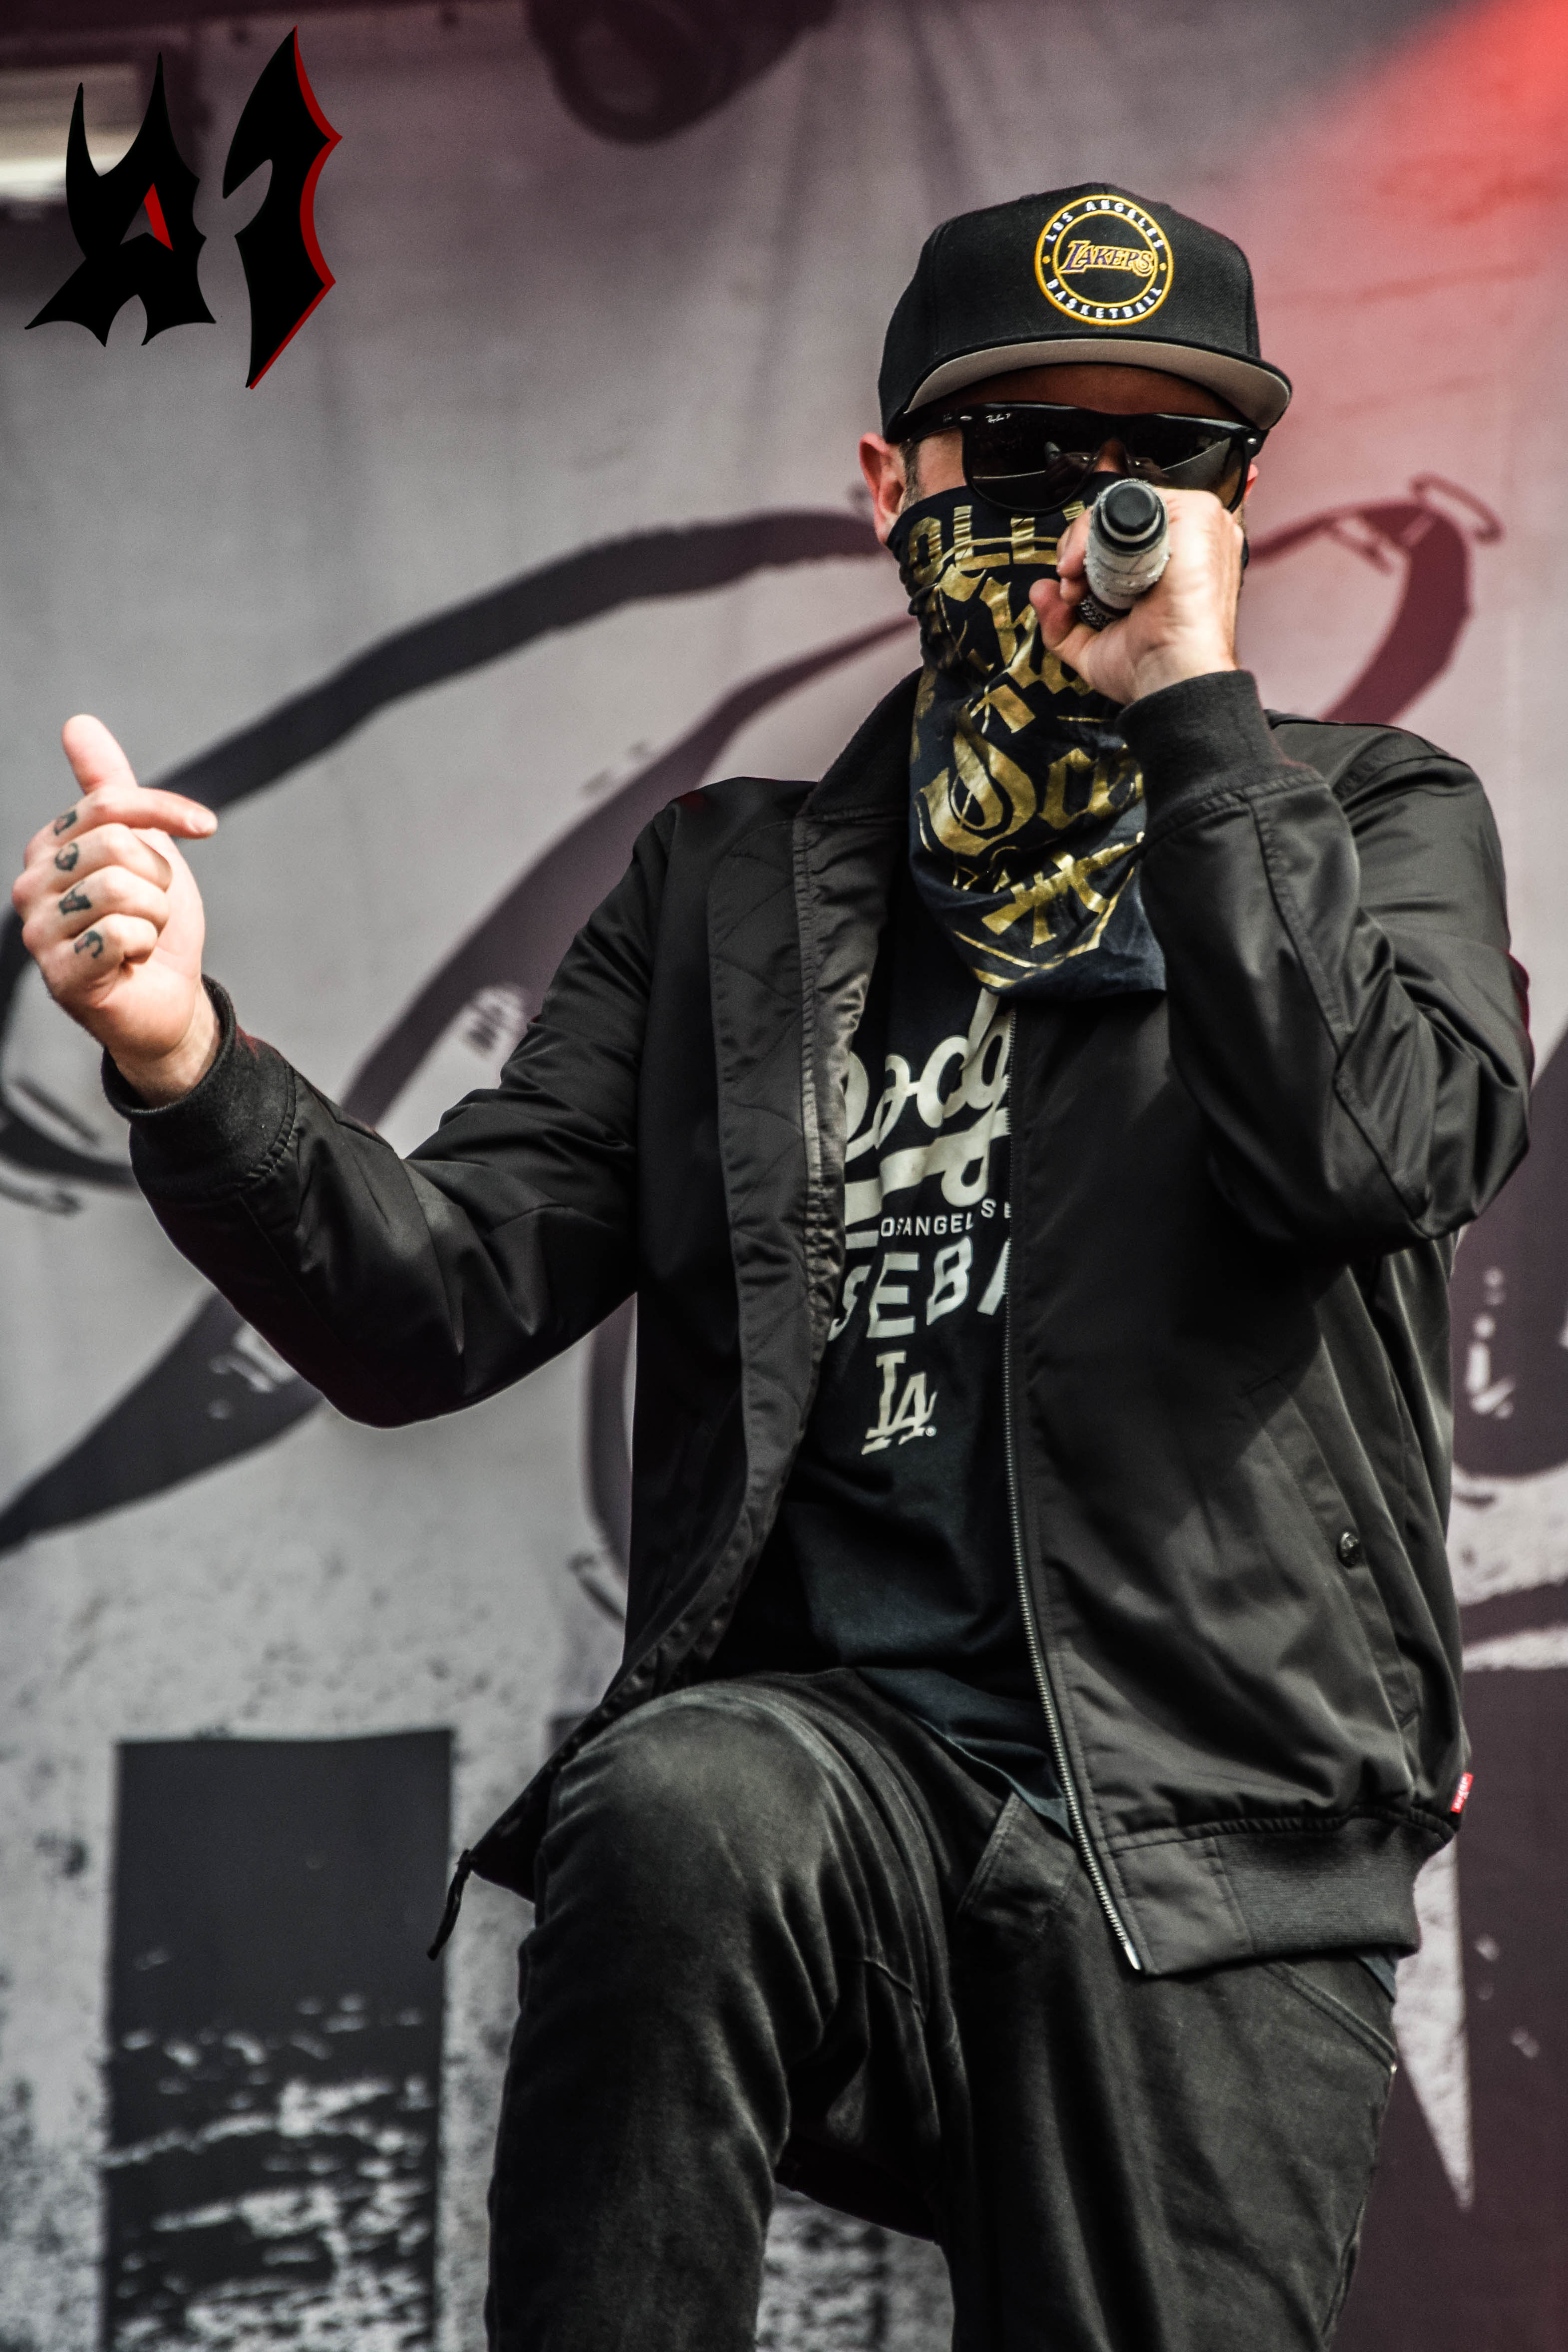 Donwload 2018 – Day 2 - Hollywood Undead 22